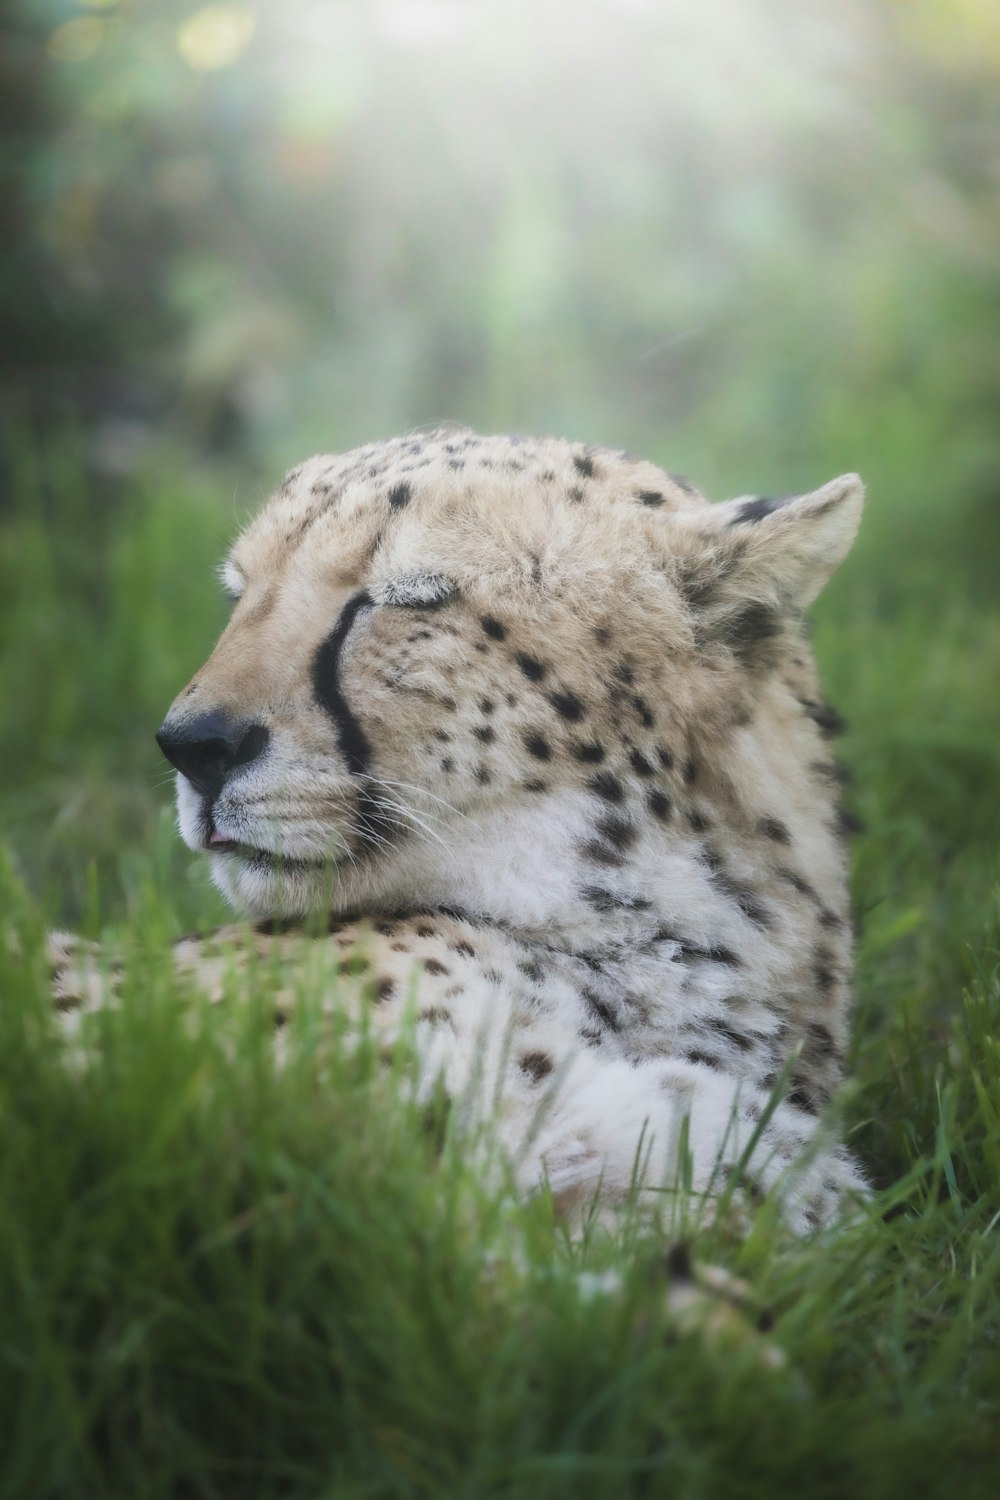 a close up of a cheetah laying in the grass